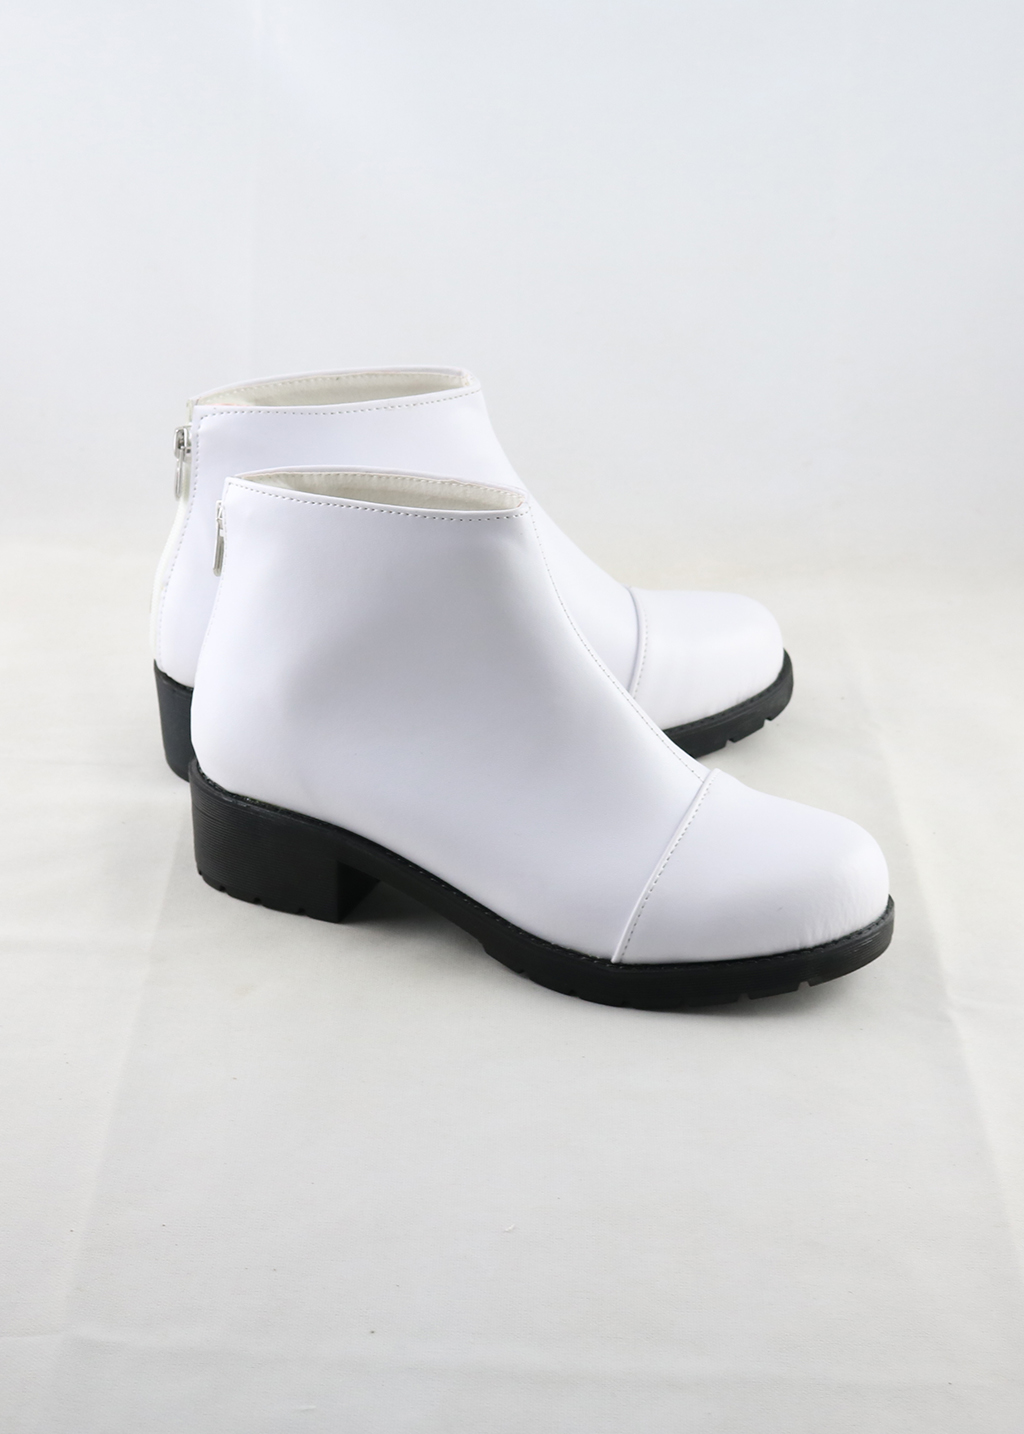 Romani Archaman Shoes Cosplay Men Fate Grand Order FGO Boots White